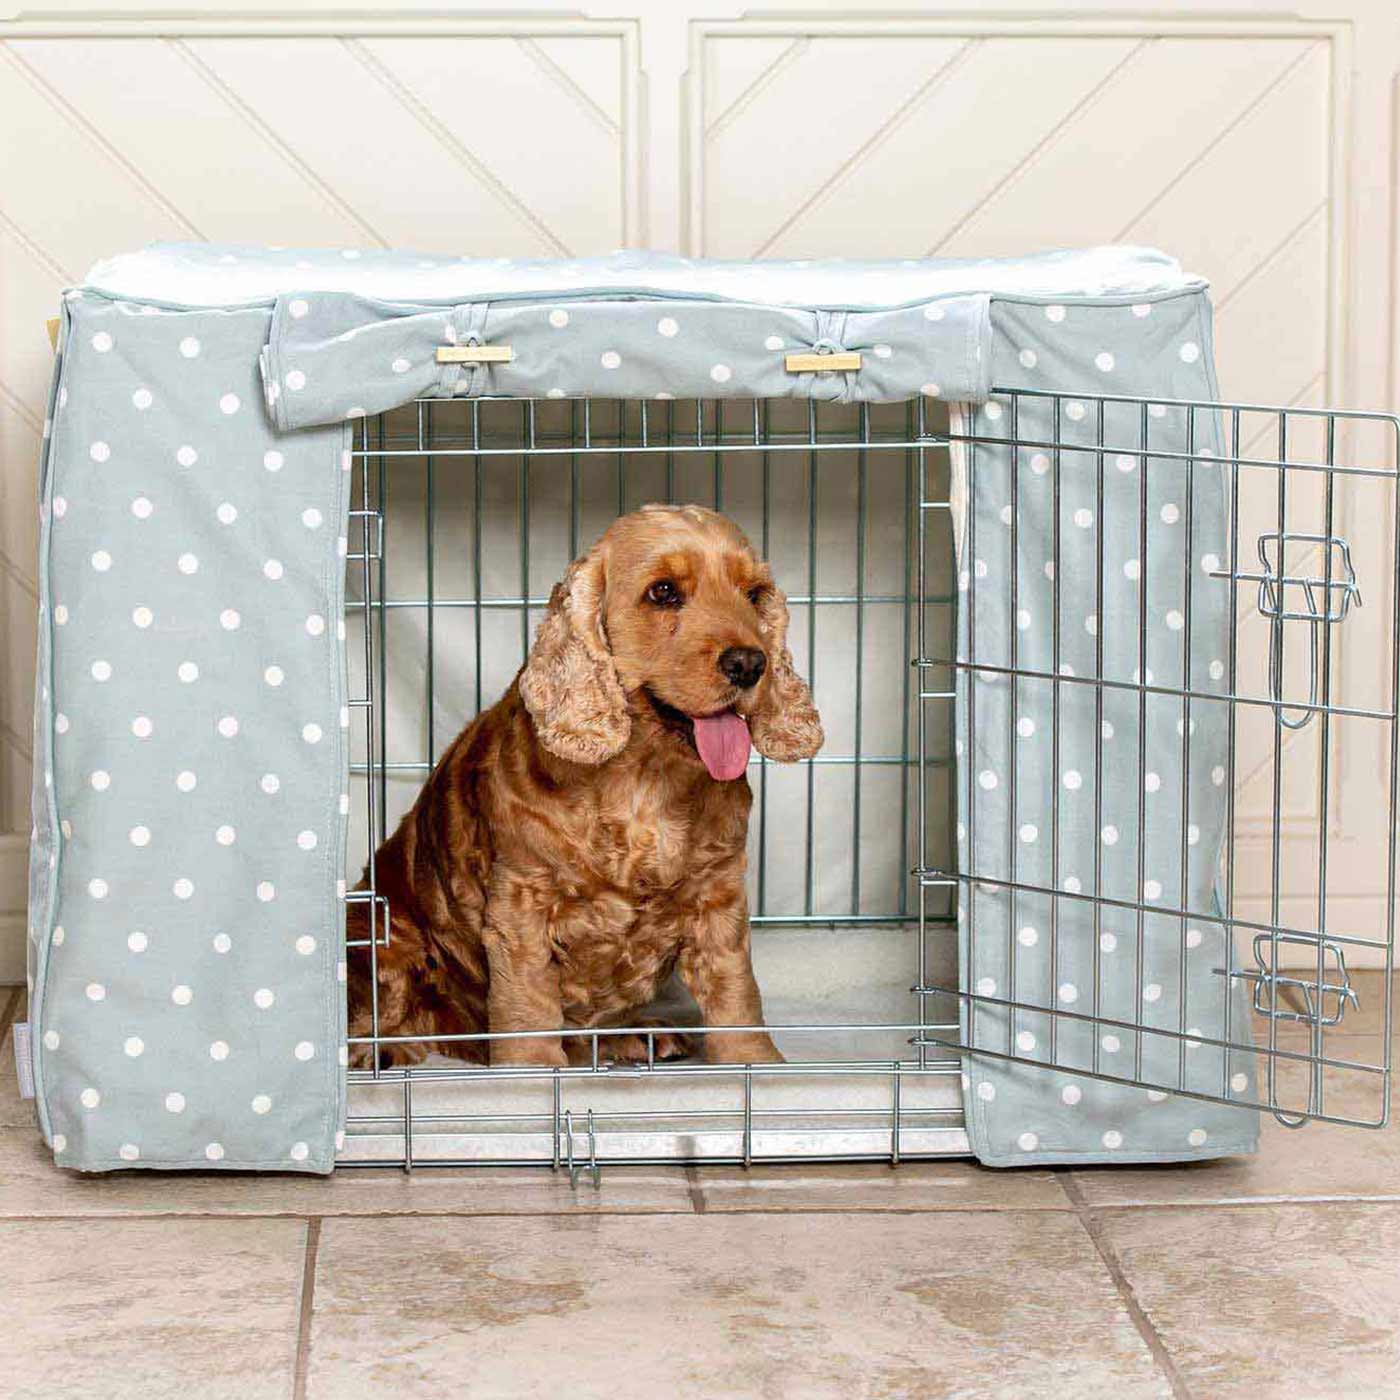 Luxury Silver Dog Cage With Cage Cover, in Duck Egg Spot. The Perfect Dog Crate For The Ultimate Naptime, Available Now to Personalize at Lords & Labradors US